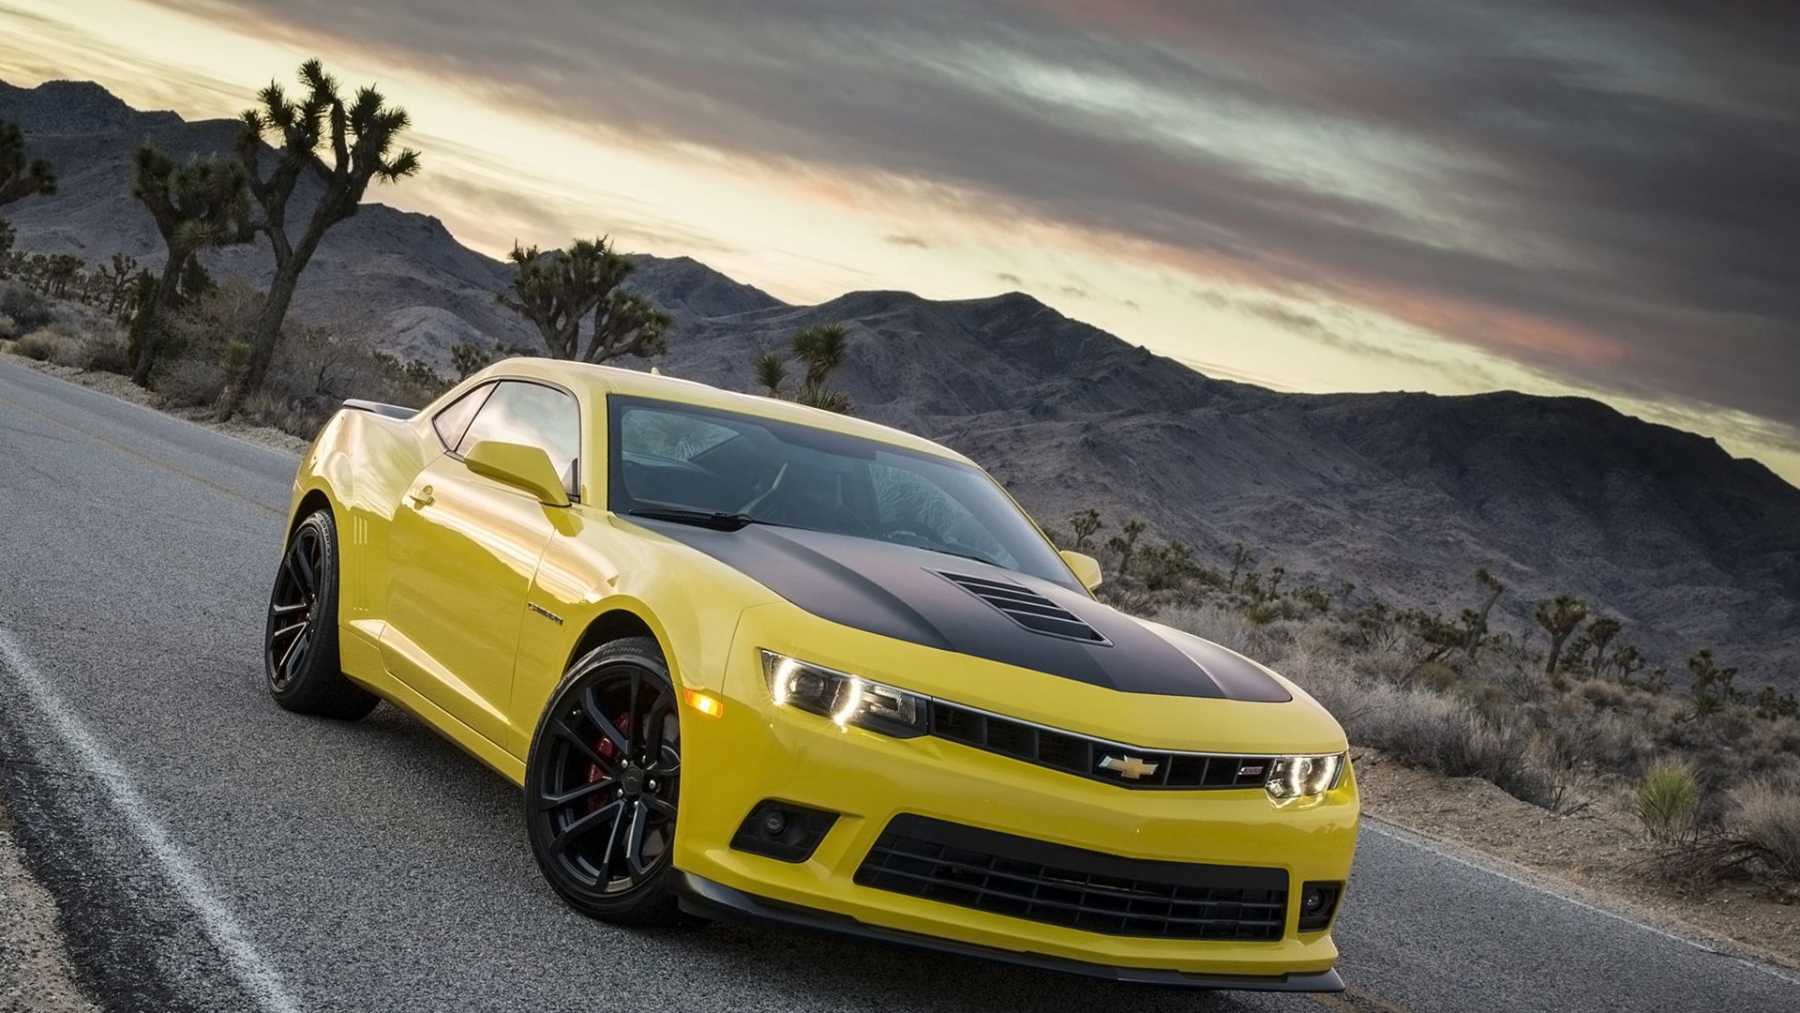 2019 Chevrolet Camaro HD Wallpapers | Background Images ...